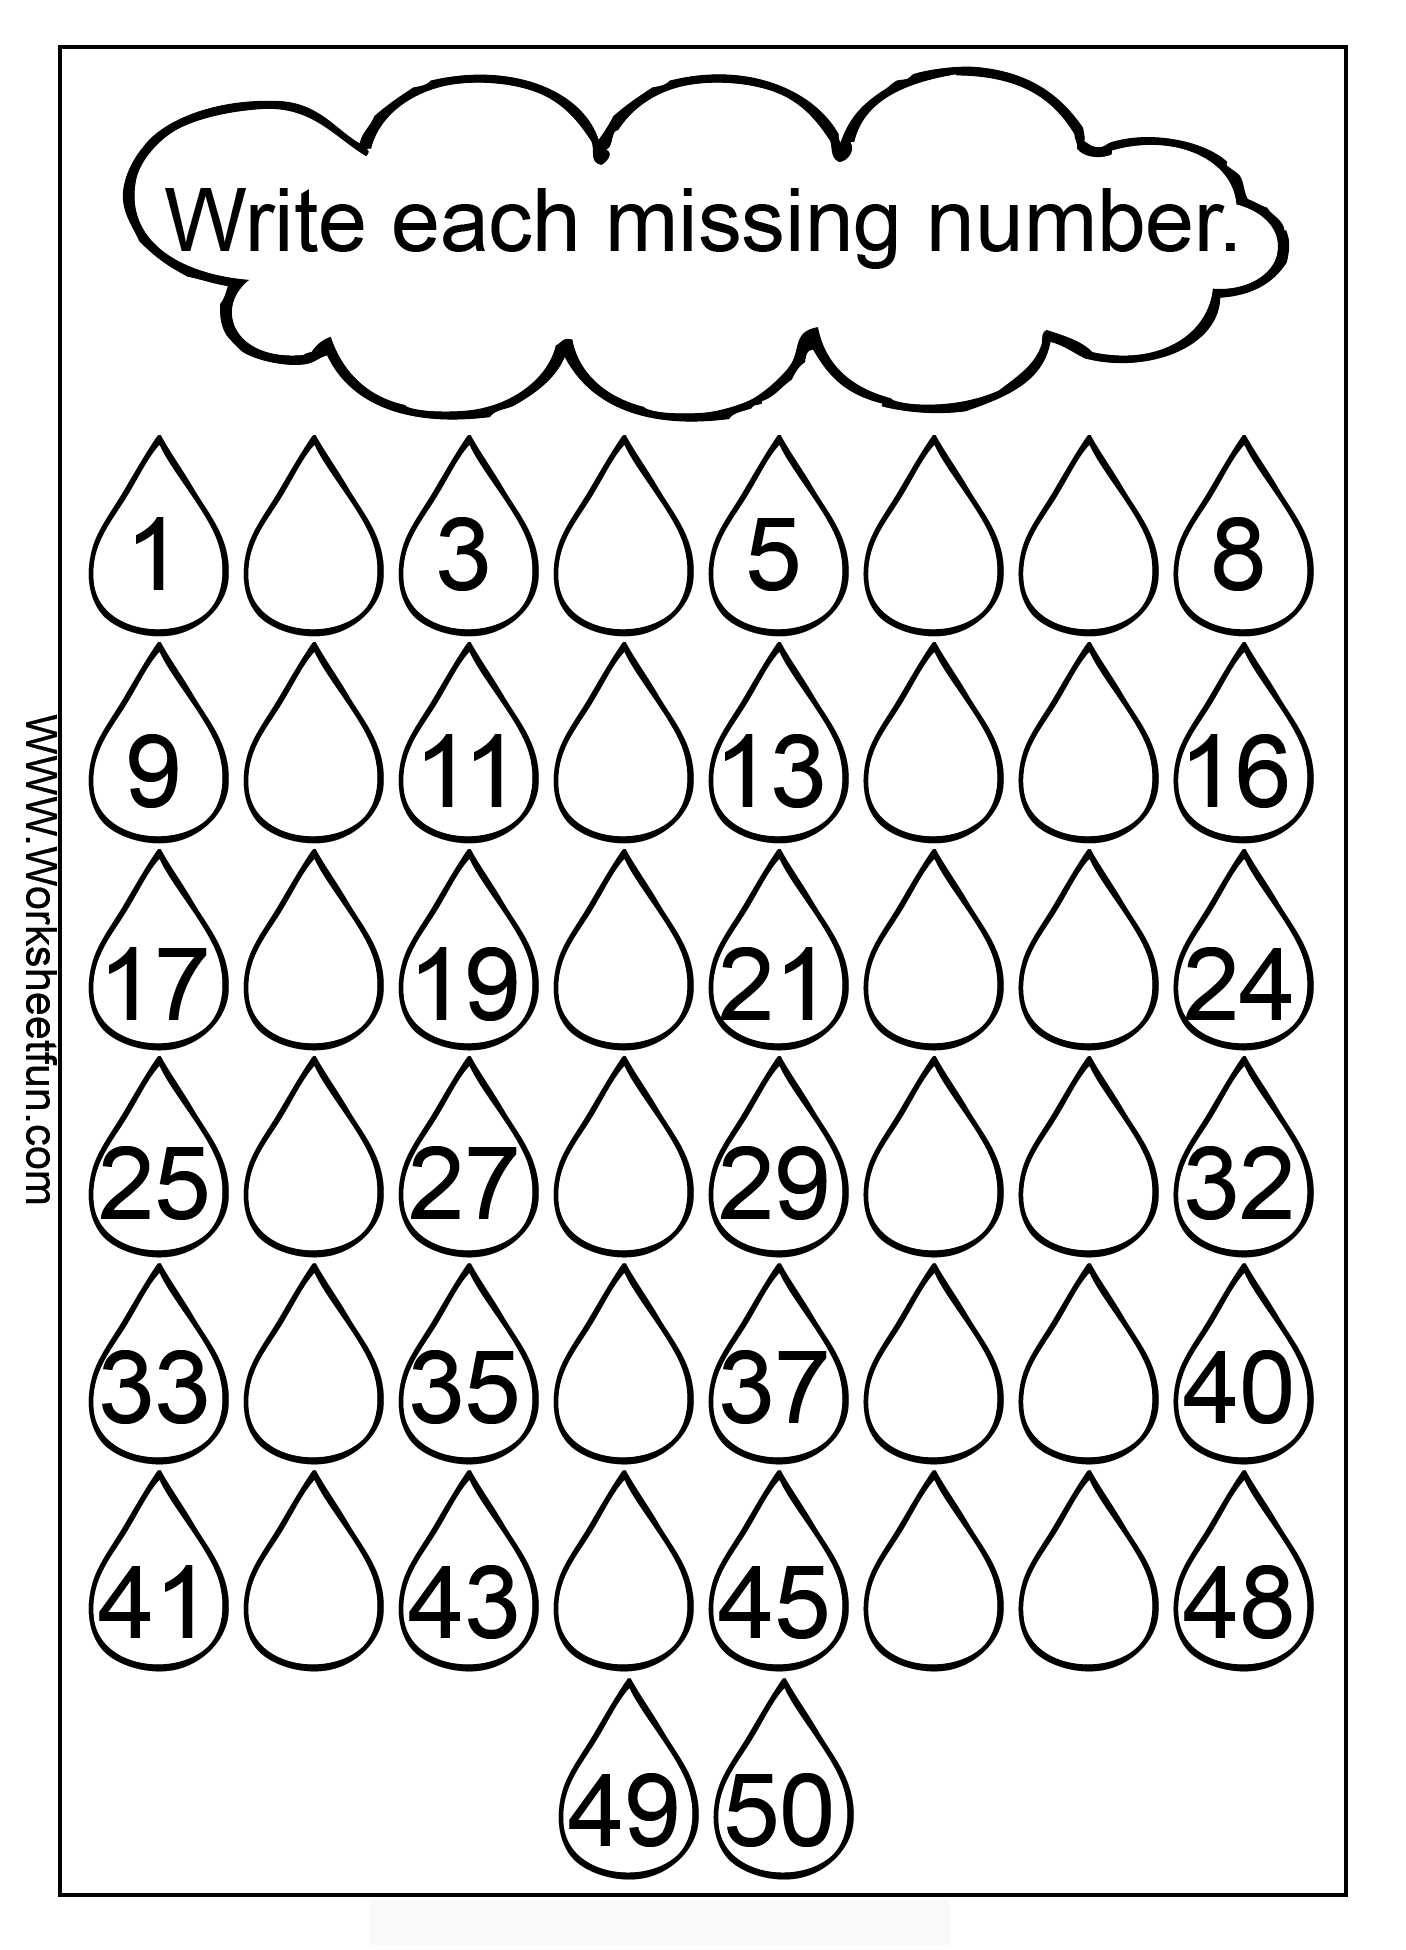 On the button Math Worksheet Along with Missing Numbers 1 50 3 Worksheets Sight Has Lots Of Good Math